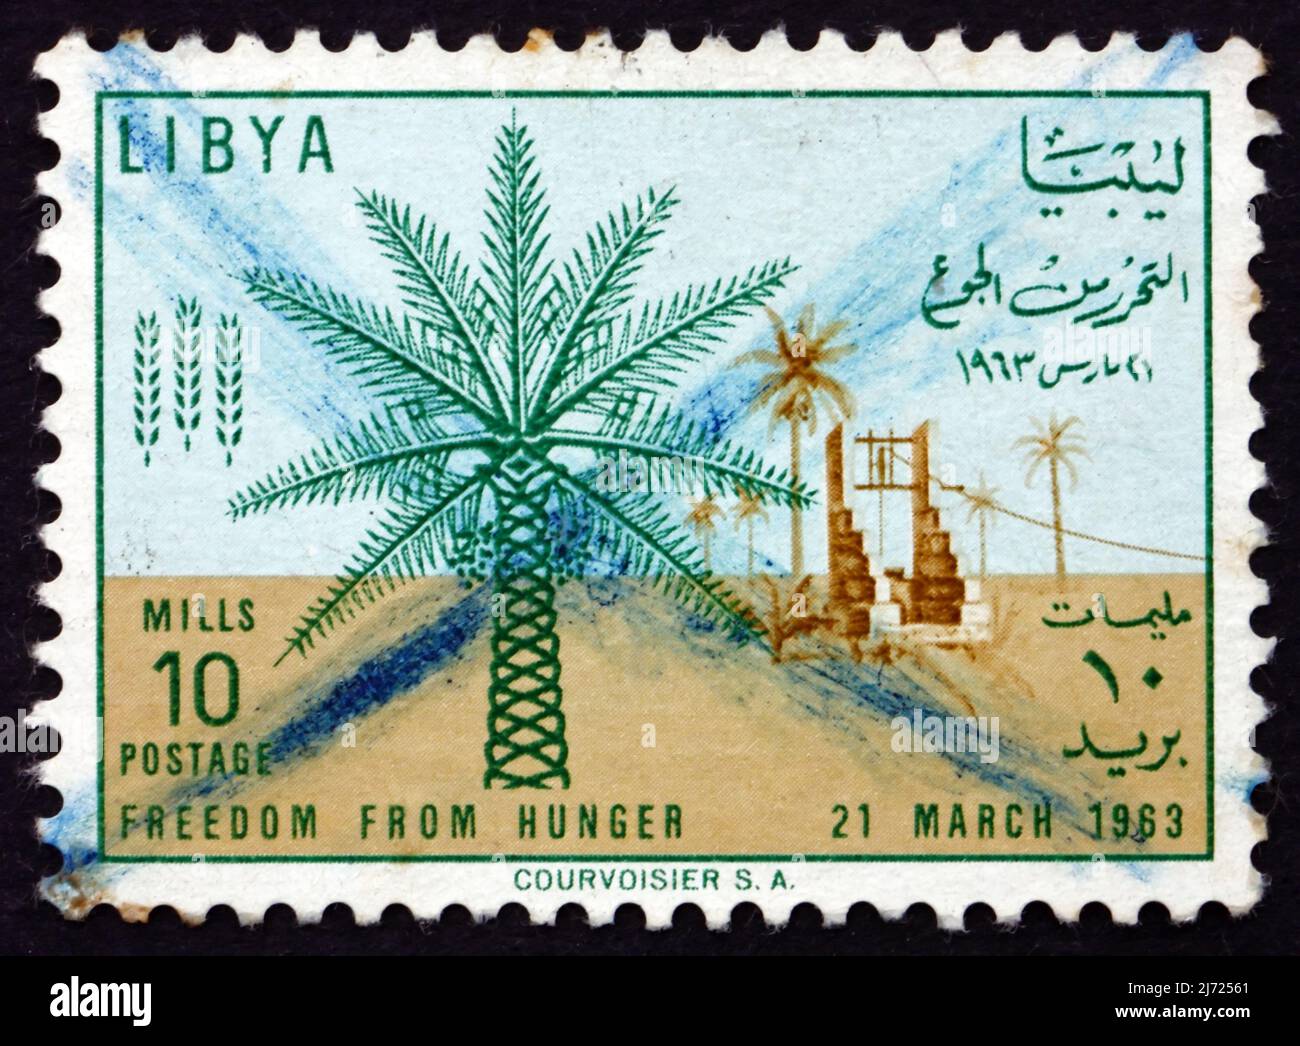 LIBYA - CIRCA 1963: a stamp printed in Libya shows Date Palm and Well, FAO Freedom from Hunger Campaign, circa 1963 Stock Photo